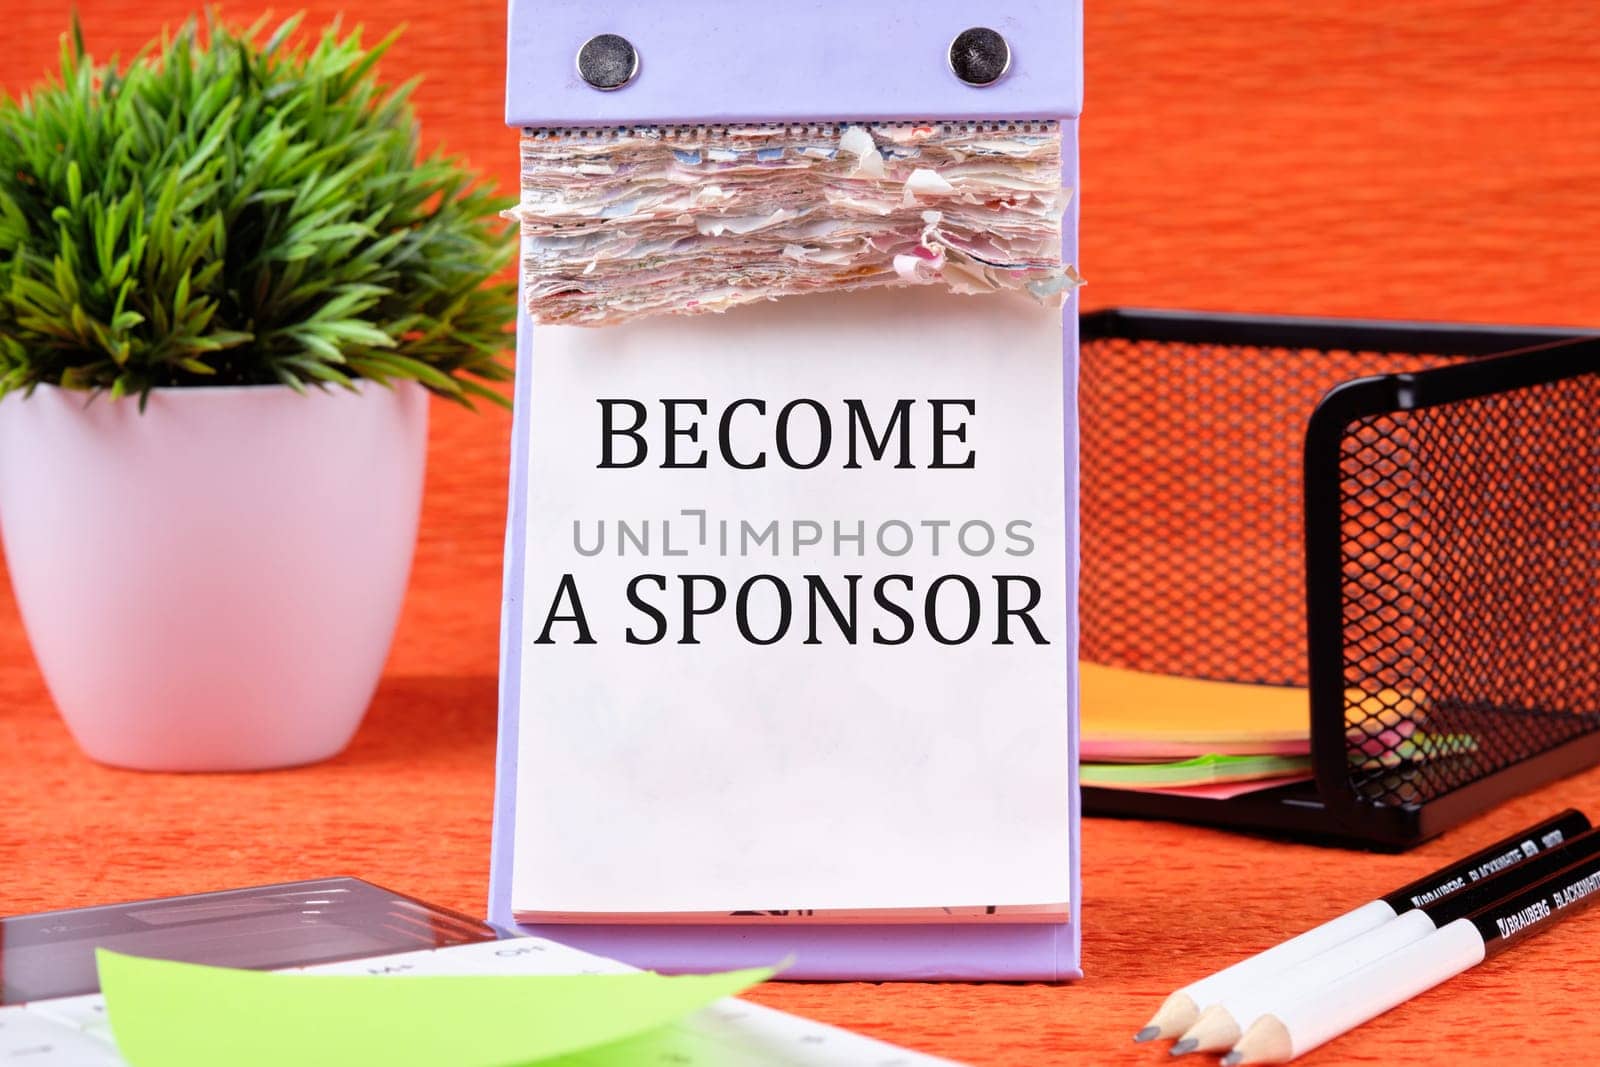 BECOME A SPONSOR text written on the page of the desktop calendar on an orange background